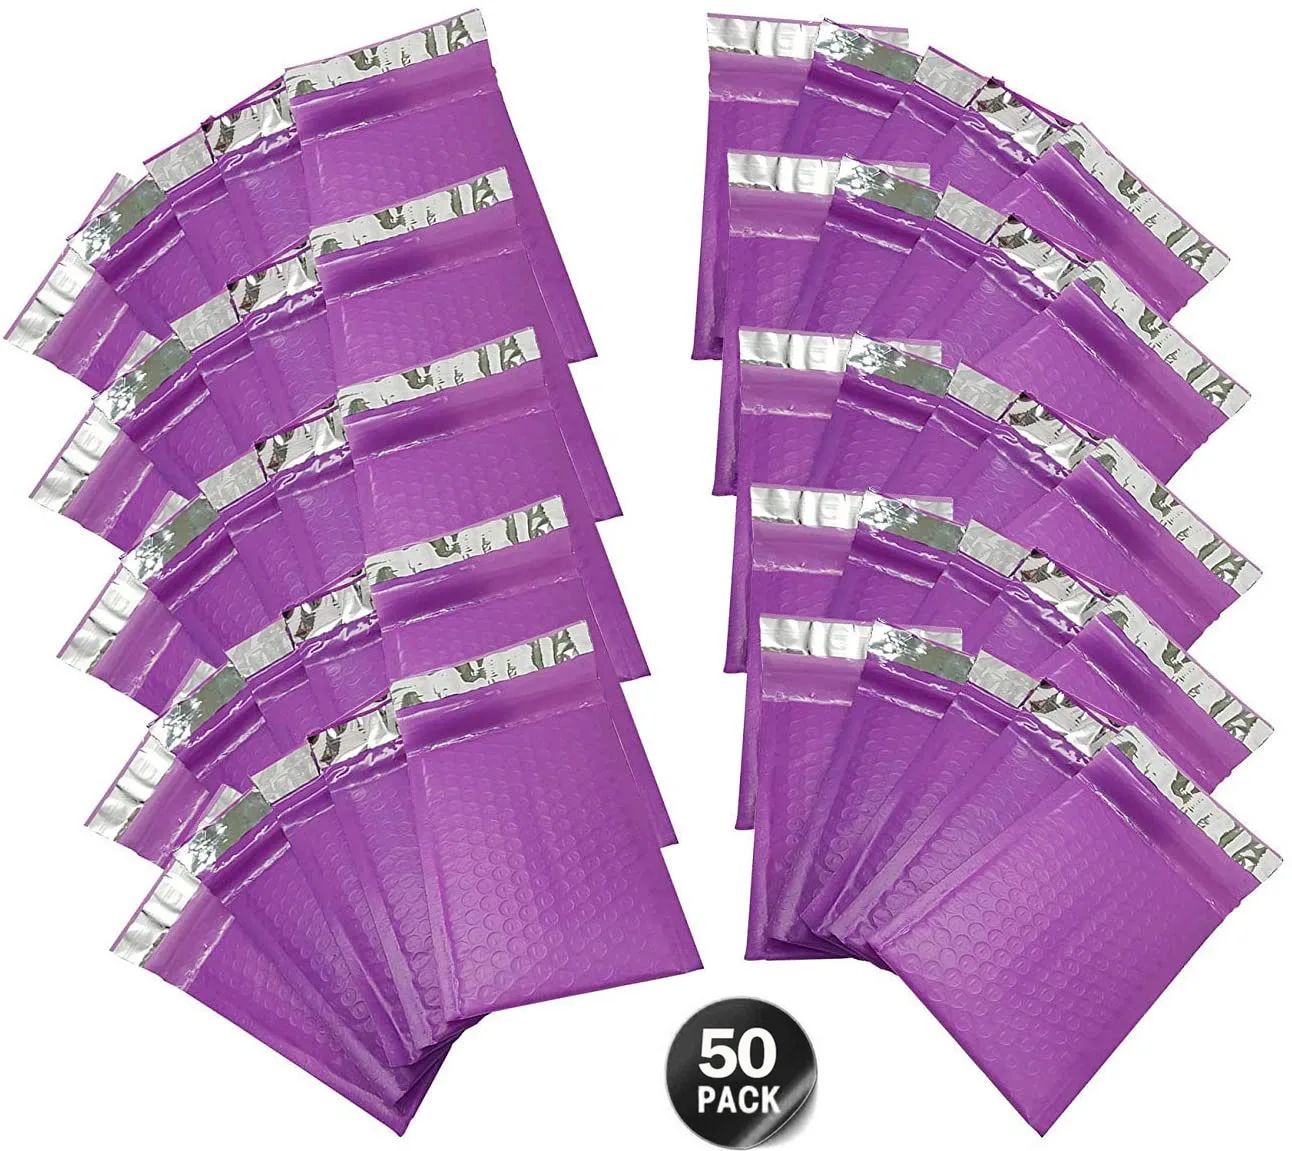 Mailing 50pcs purple Bubble Padded Shipping Envelopes for Mailing Gift Packaging Self Seal Courier Storage Bag Mail Shipment 